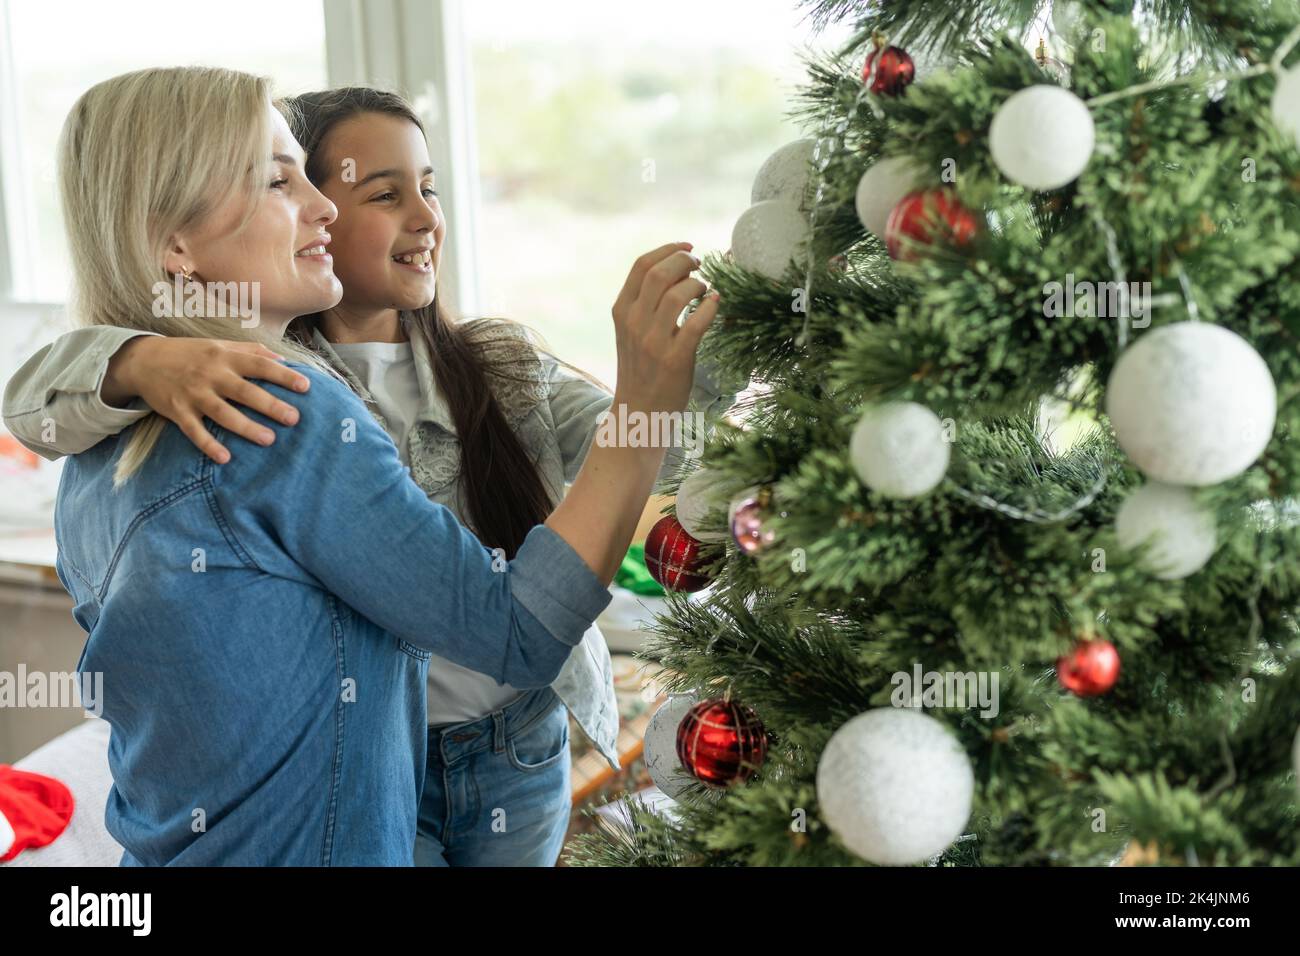 https://c8.alamy.com/comp/2K4JNM6/merry-christmas-and-happy-holidays-cheerful-mother-and-her-cute-daughter-girl-exchanging-gifts-mom-and-little-child-having-fun-near-tree-indoors-2K4JNM6.jpg